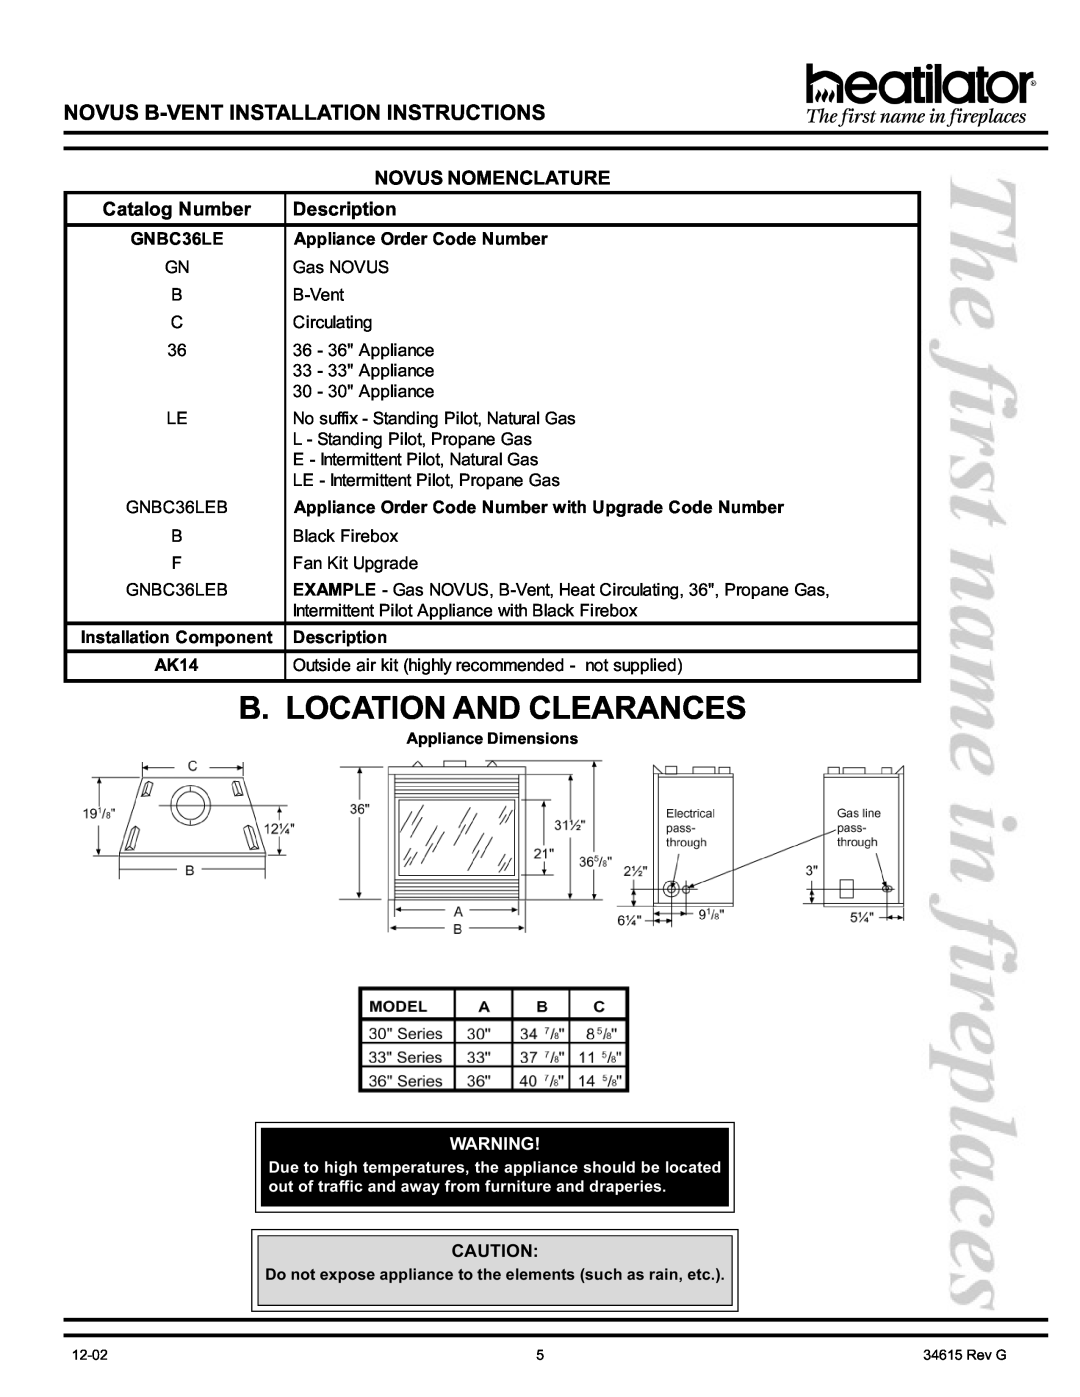 Hearth and Home Technologies GNBC33 B. Location And Clearances, Novus Nomenclature, GNBC36LE, Appliance Order Code Number 